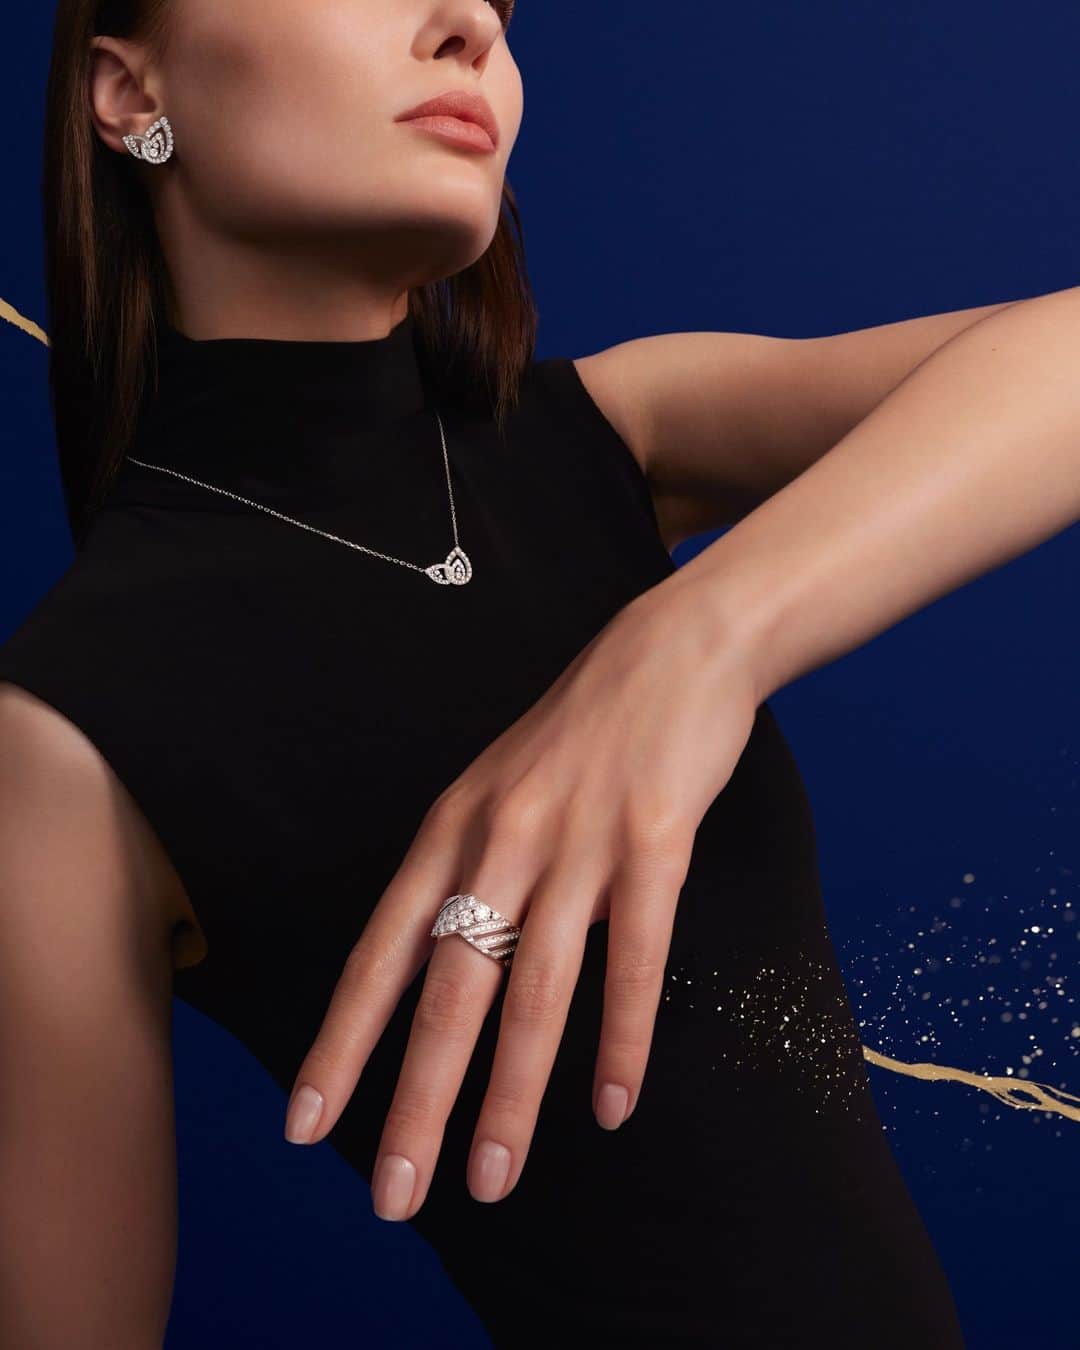 Chaumetのインスタグラム：「This holiday season, embrace grace with audacity and enhance your look with Joséphine for the ultimate finishing touch. ⁣ ⁣ #Chaumet #FindYourGoldenTreasure #ChaumetTreasureHunt #MyCrownMyWay #DoItLikeJosephine」